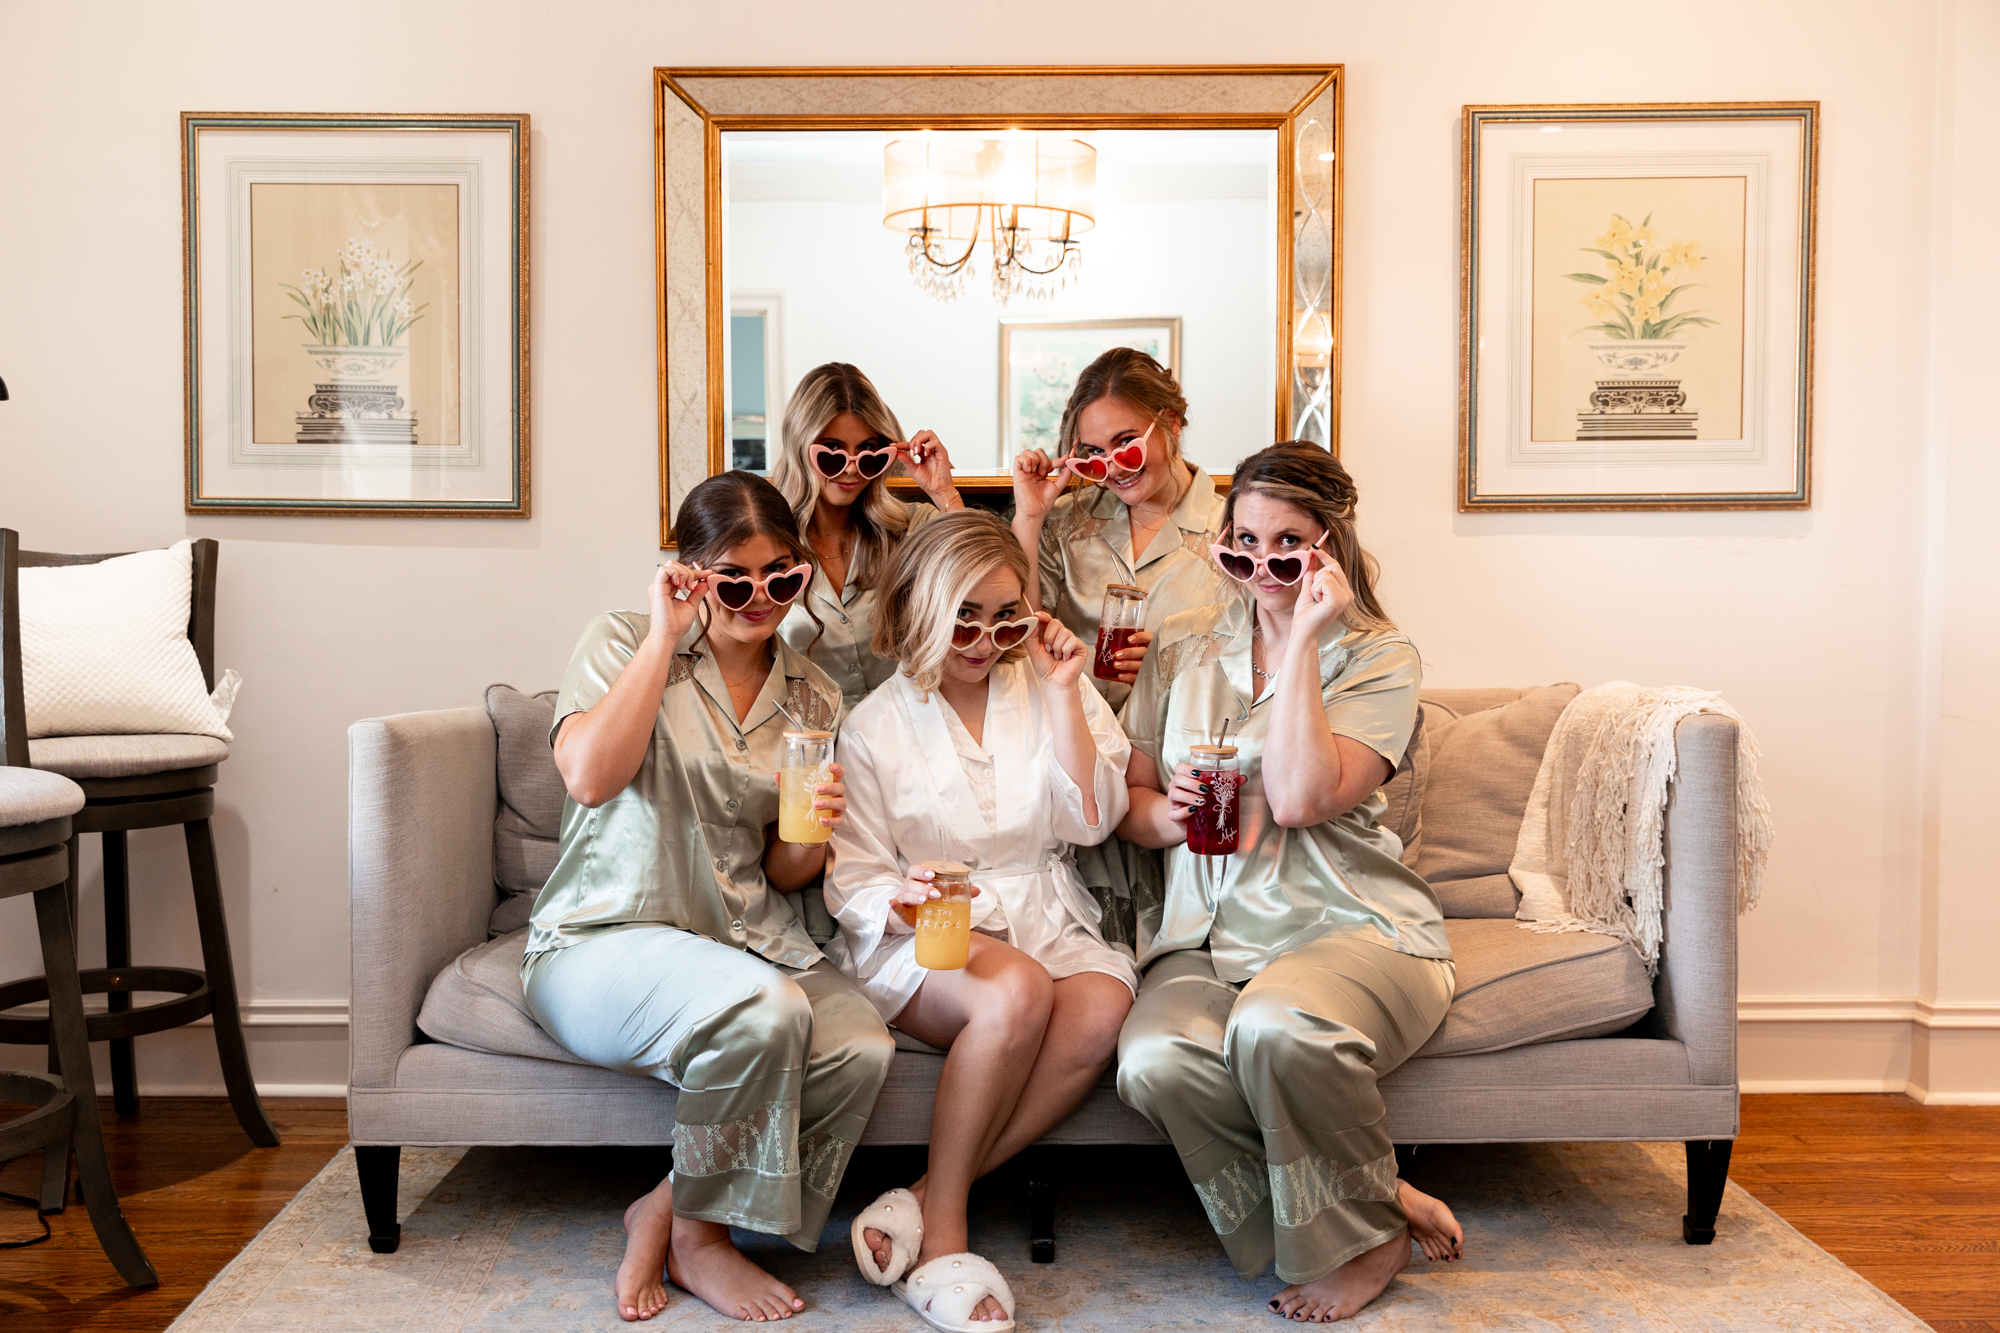 Bride and her Bridesmaids getting ready wearing silk robes and heart-shaped sunglasses sitting on a couch